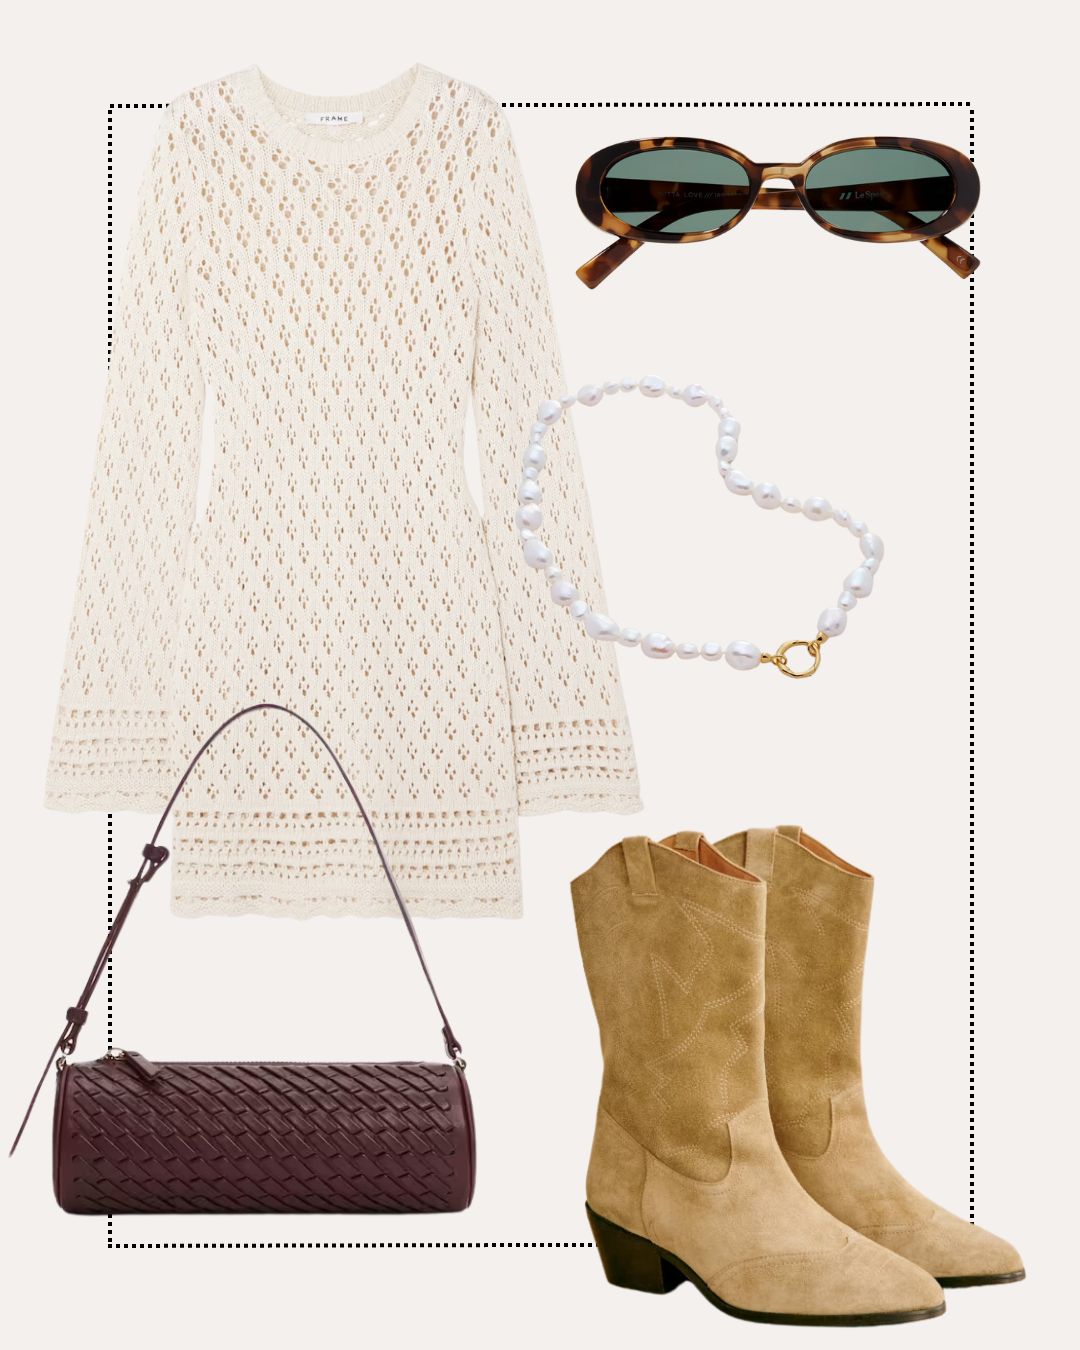 What to wear to Coachella: crochet dress and suede boots.